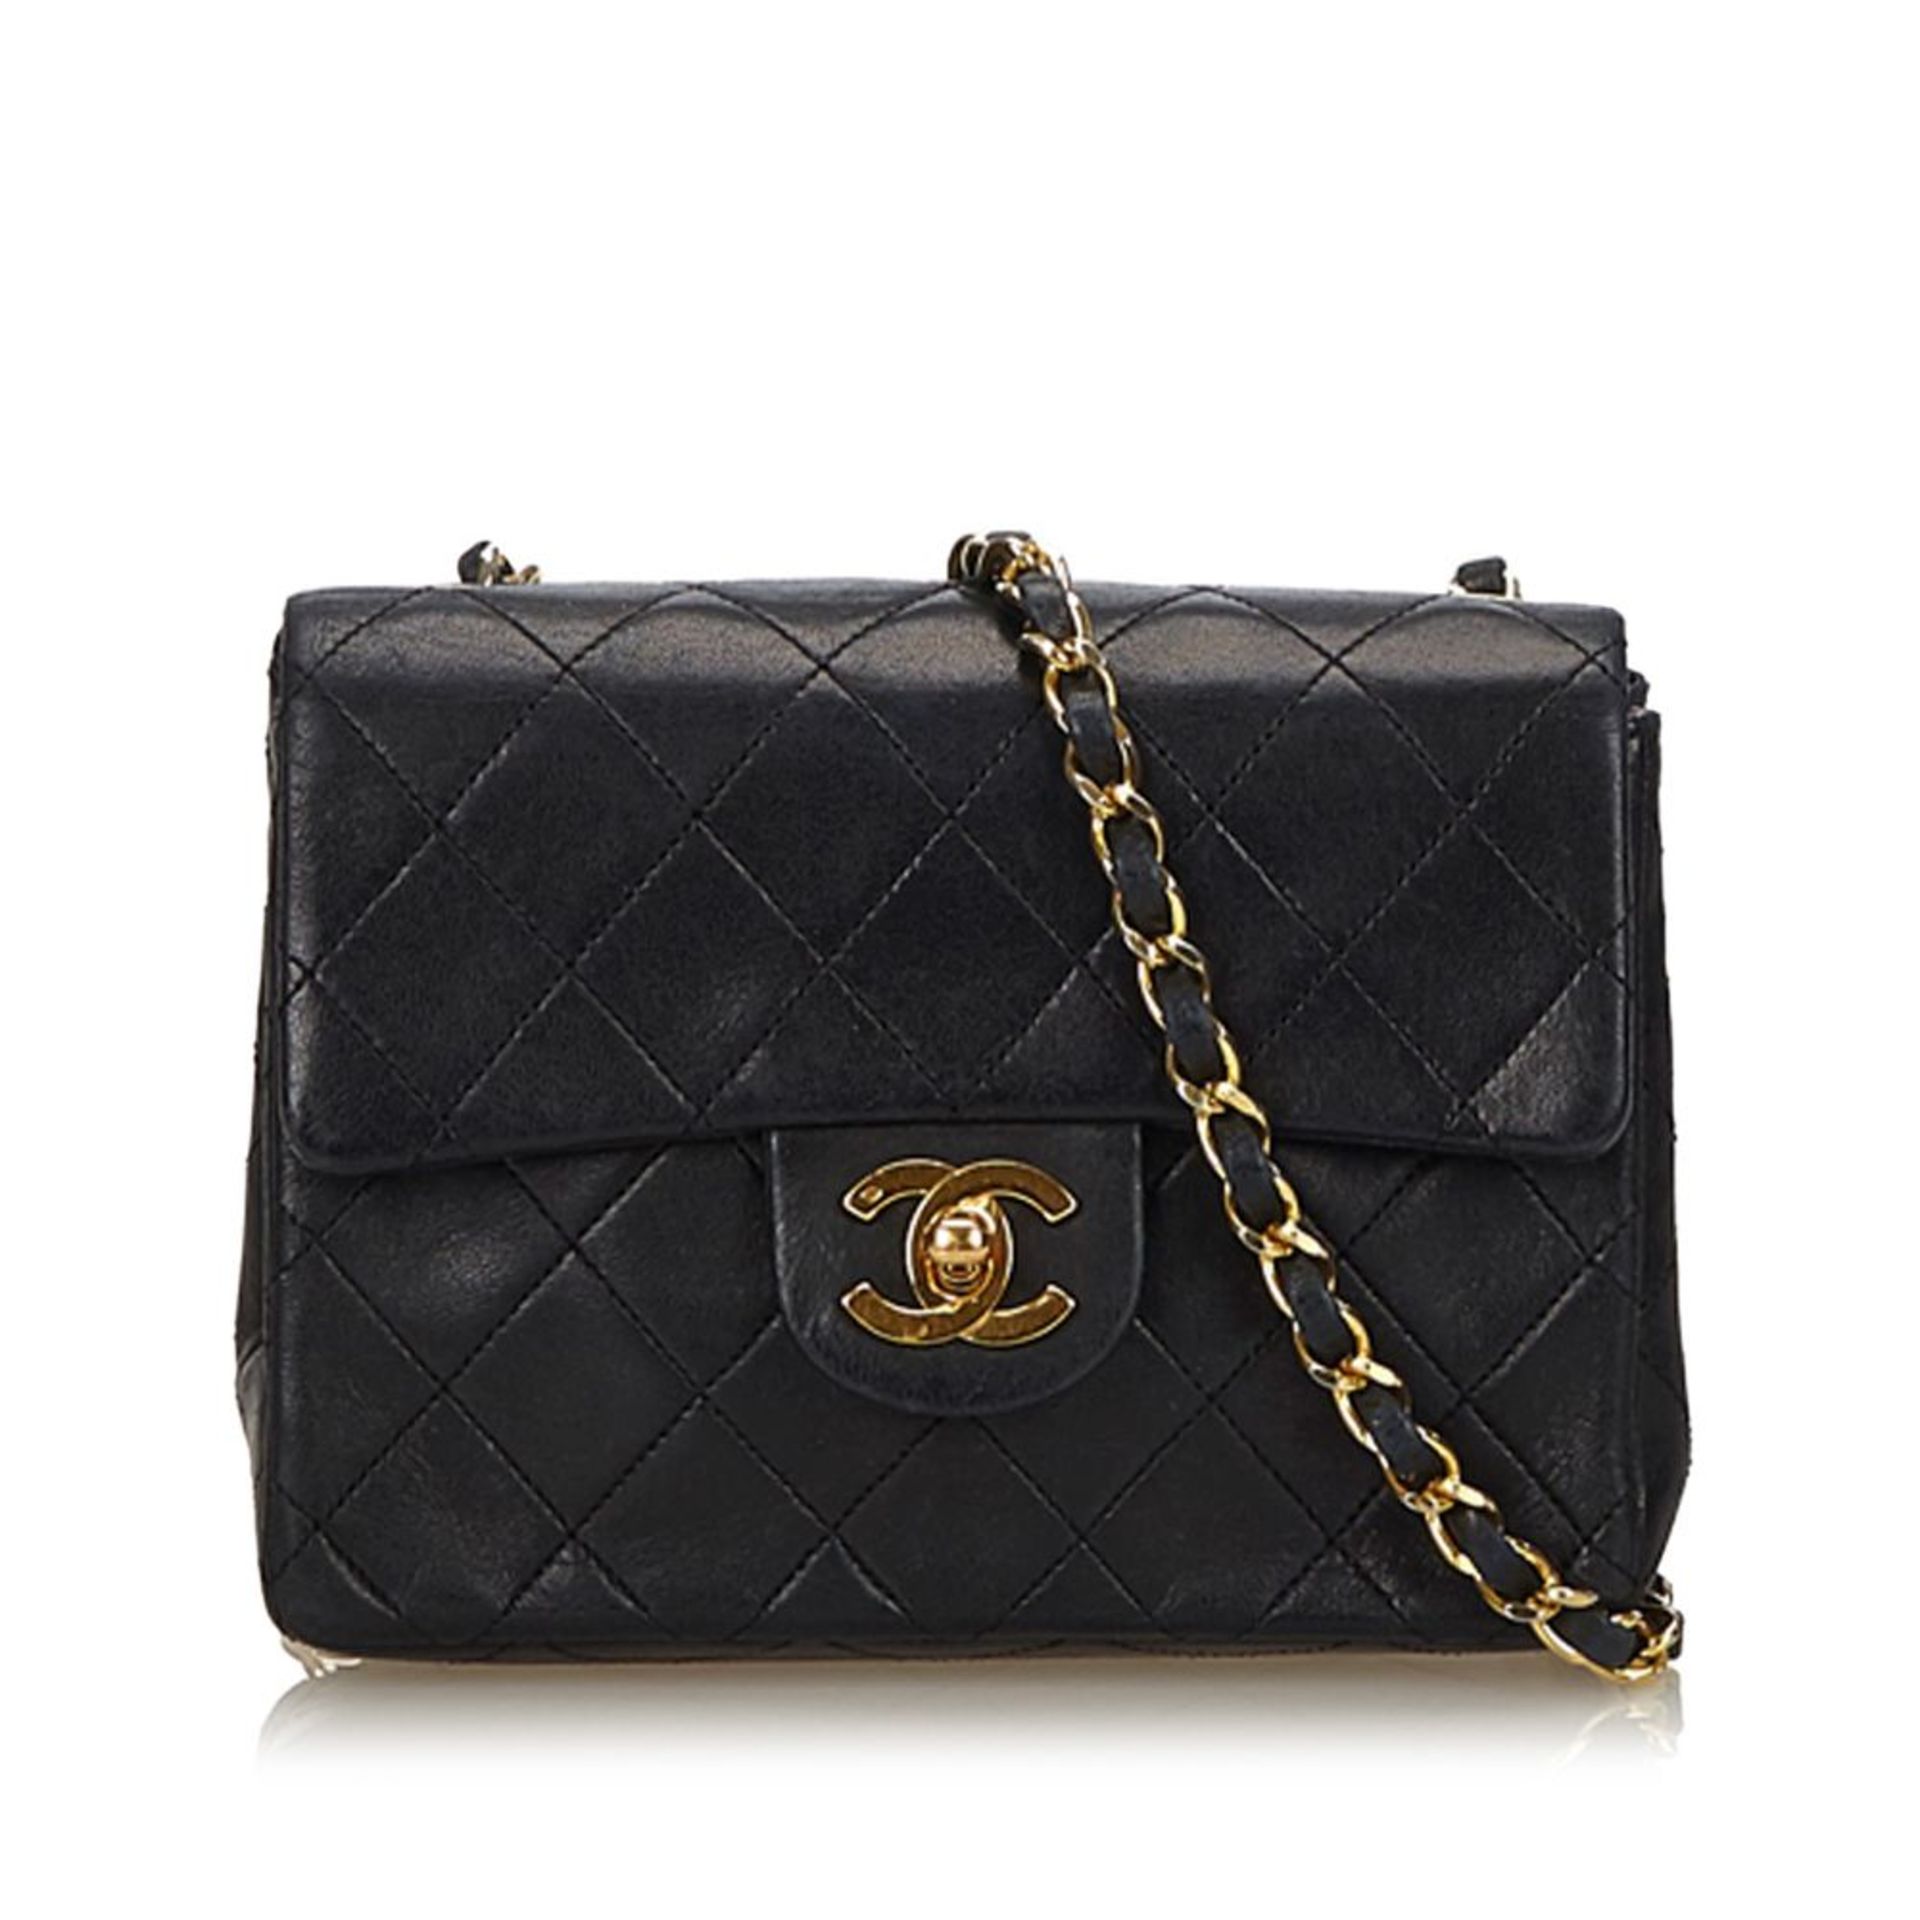 A Chanel mini classic flap handbag,features a quilted leather body, exterior back slip pocket, a